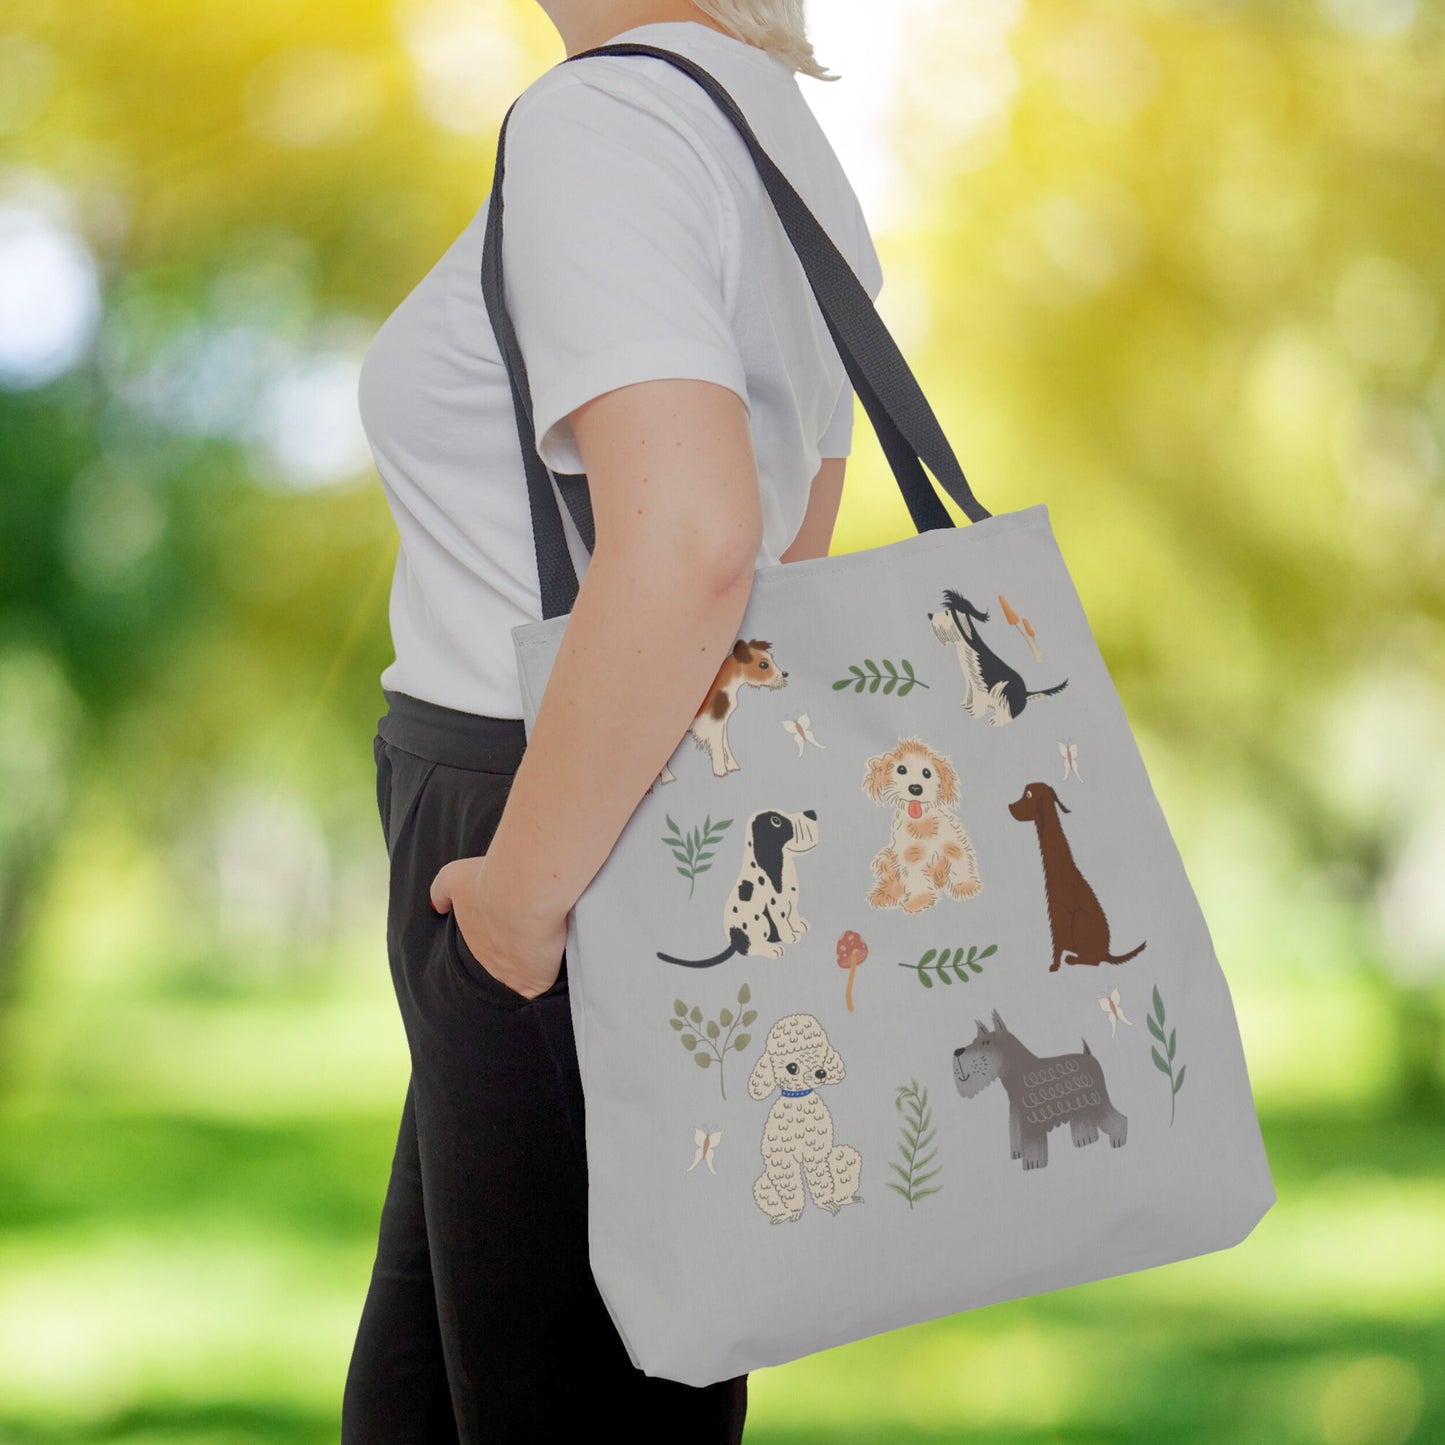 Dog Tote Bag, Mushroom Tote Bag, Butterfly Cottagecore Dogs Tote Bag Gift for Dog Lover Kids Gifts Scottie Dog Aesthetic Puppies Tote Bag